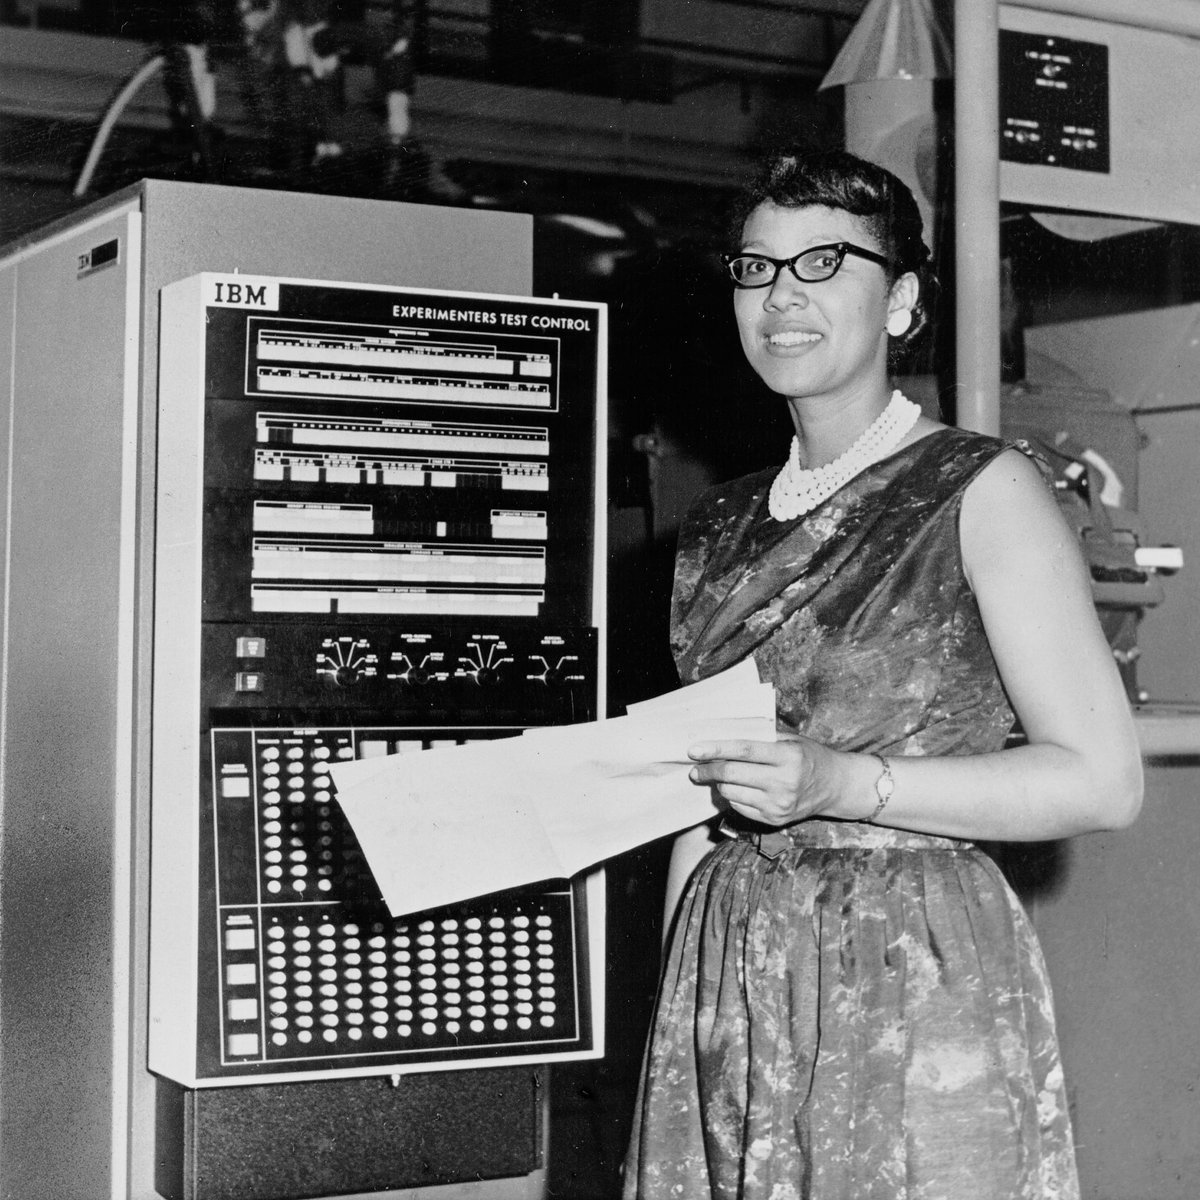 Melba Roy Mouton (1929-1990) was an African-American woman Mathematician & computer programmer who led a team of  @NASA mathematicians (known as "computers") in tracking the orbit of Echo 1. Launched in 1960, Echo 1 was designed to explore the new field of communications via space